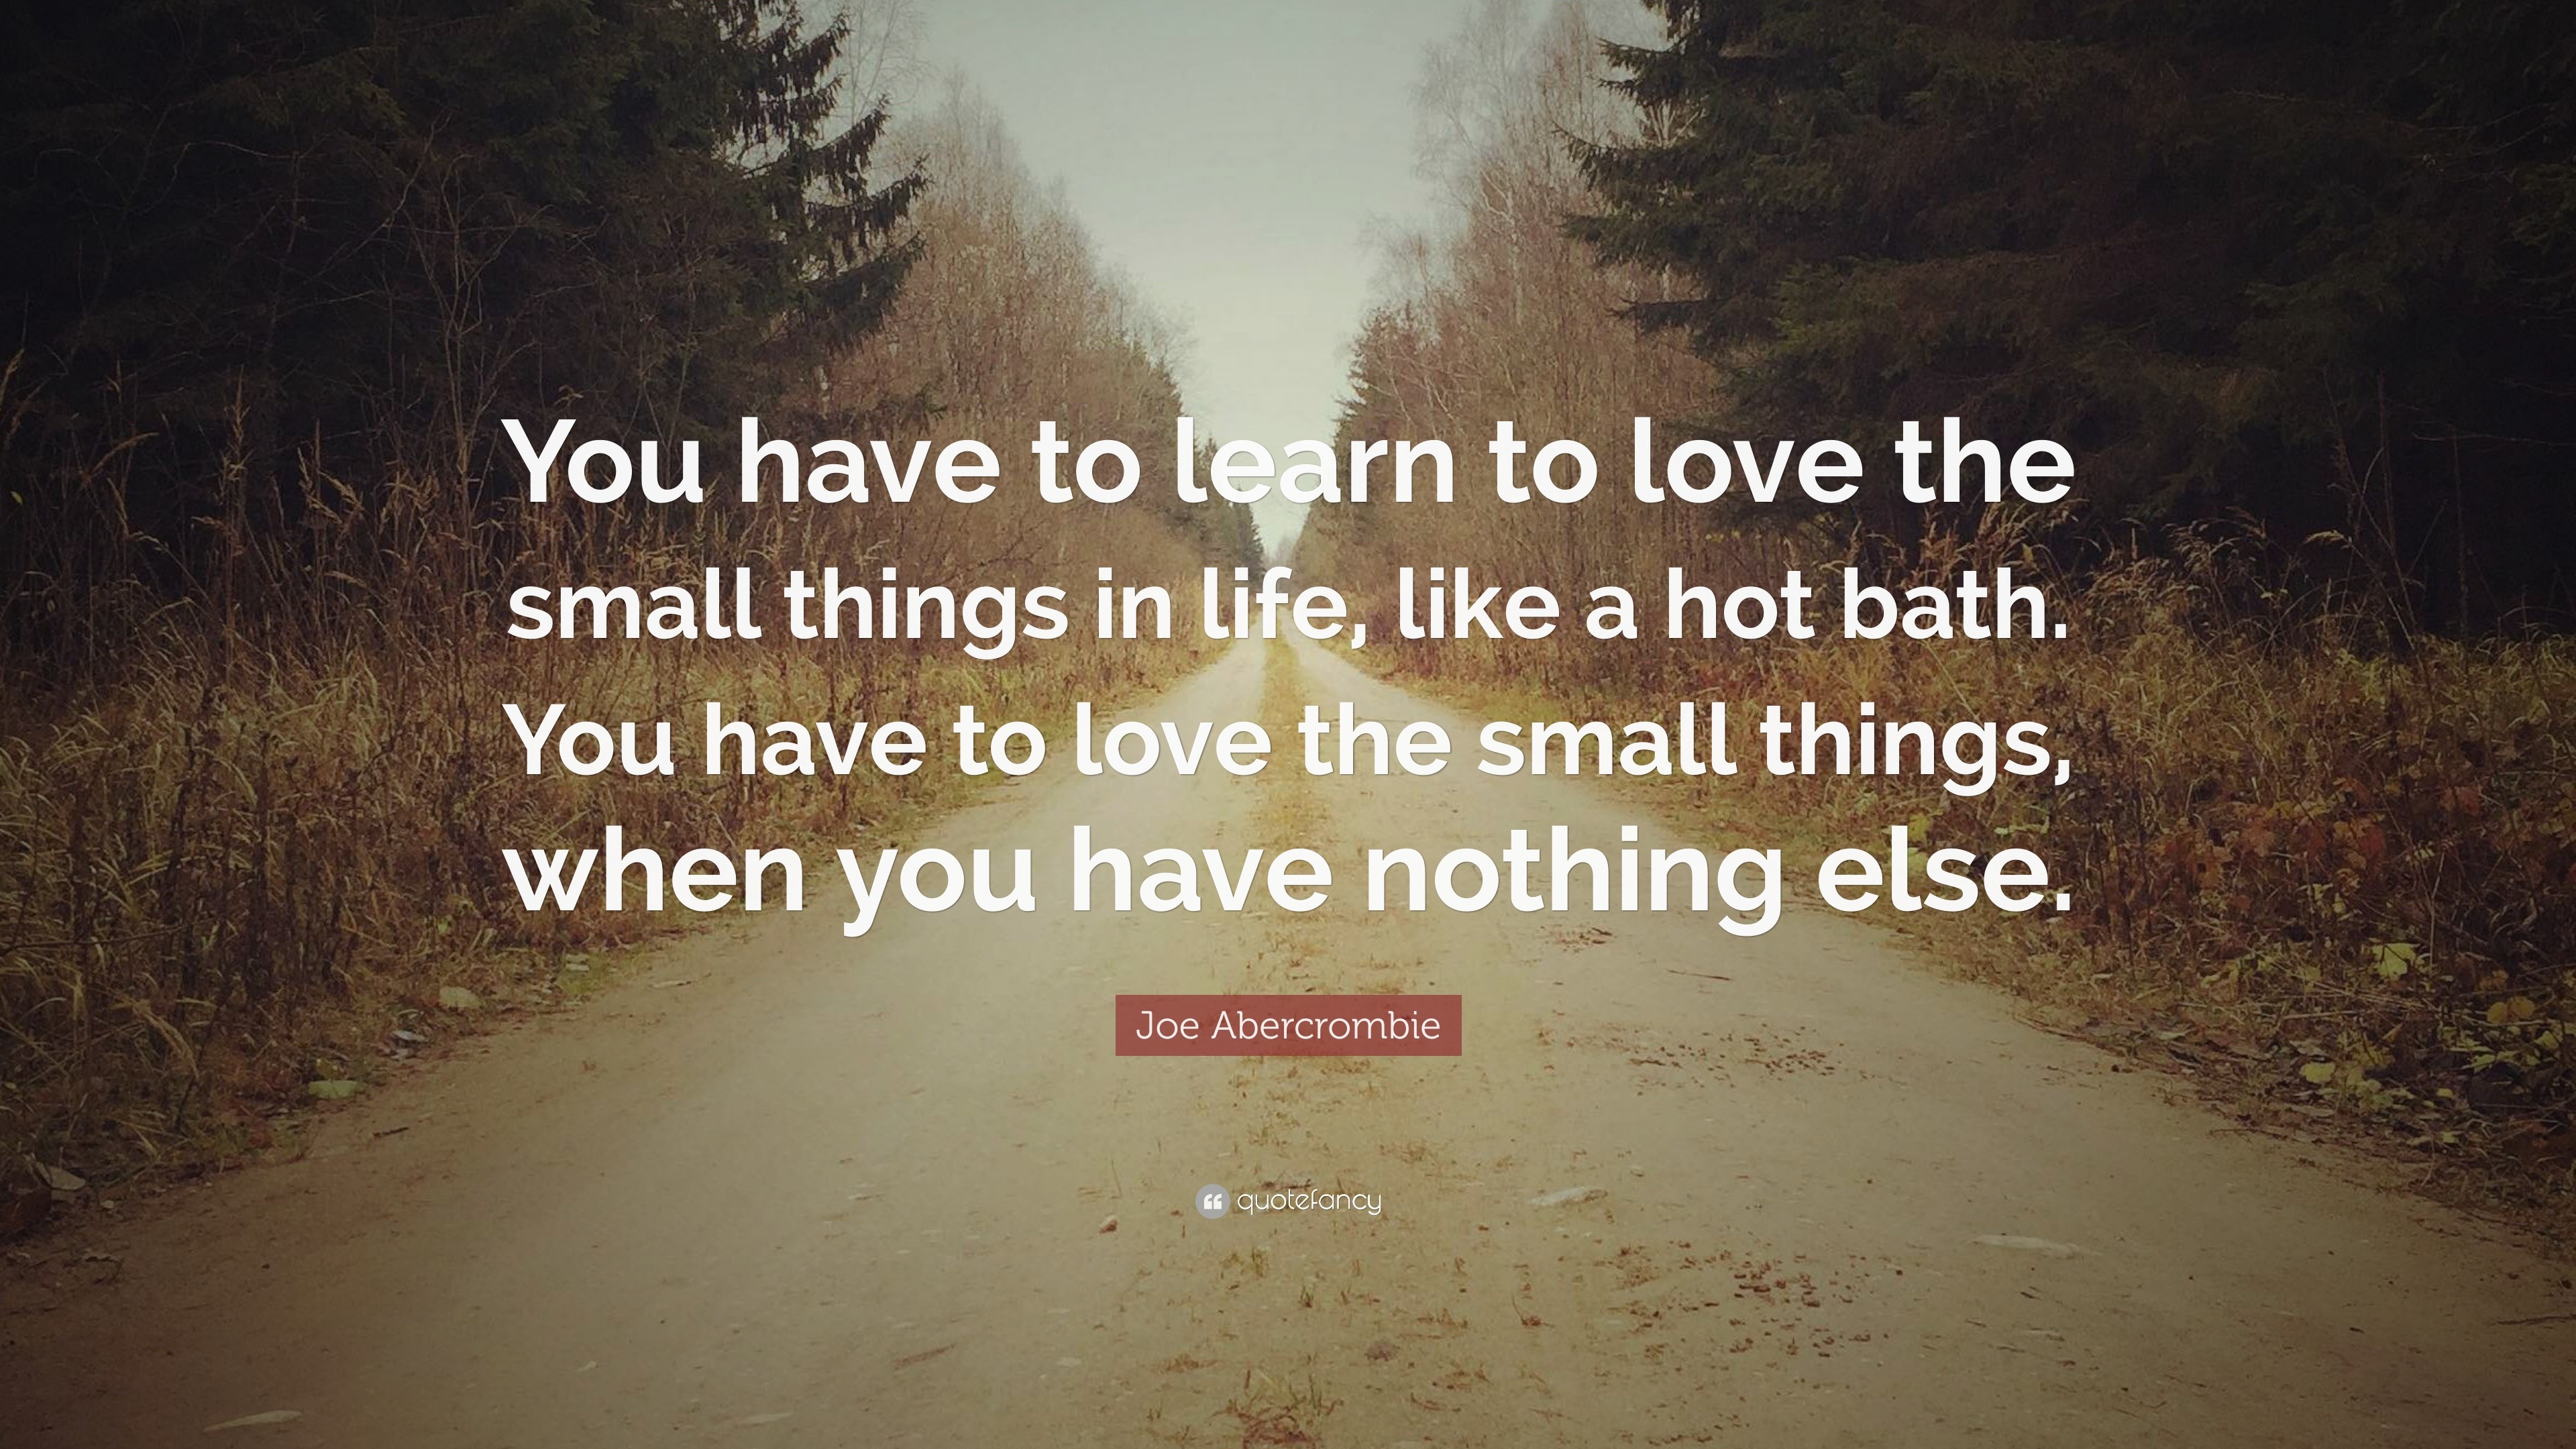 Joe Abercrombie Quote “You have to learn to love the small things in life